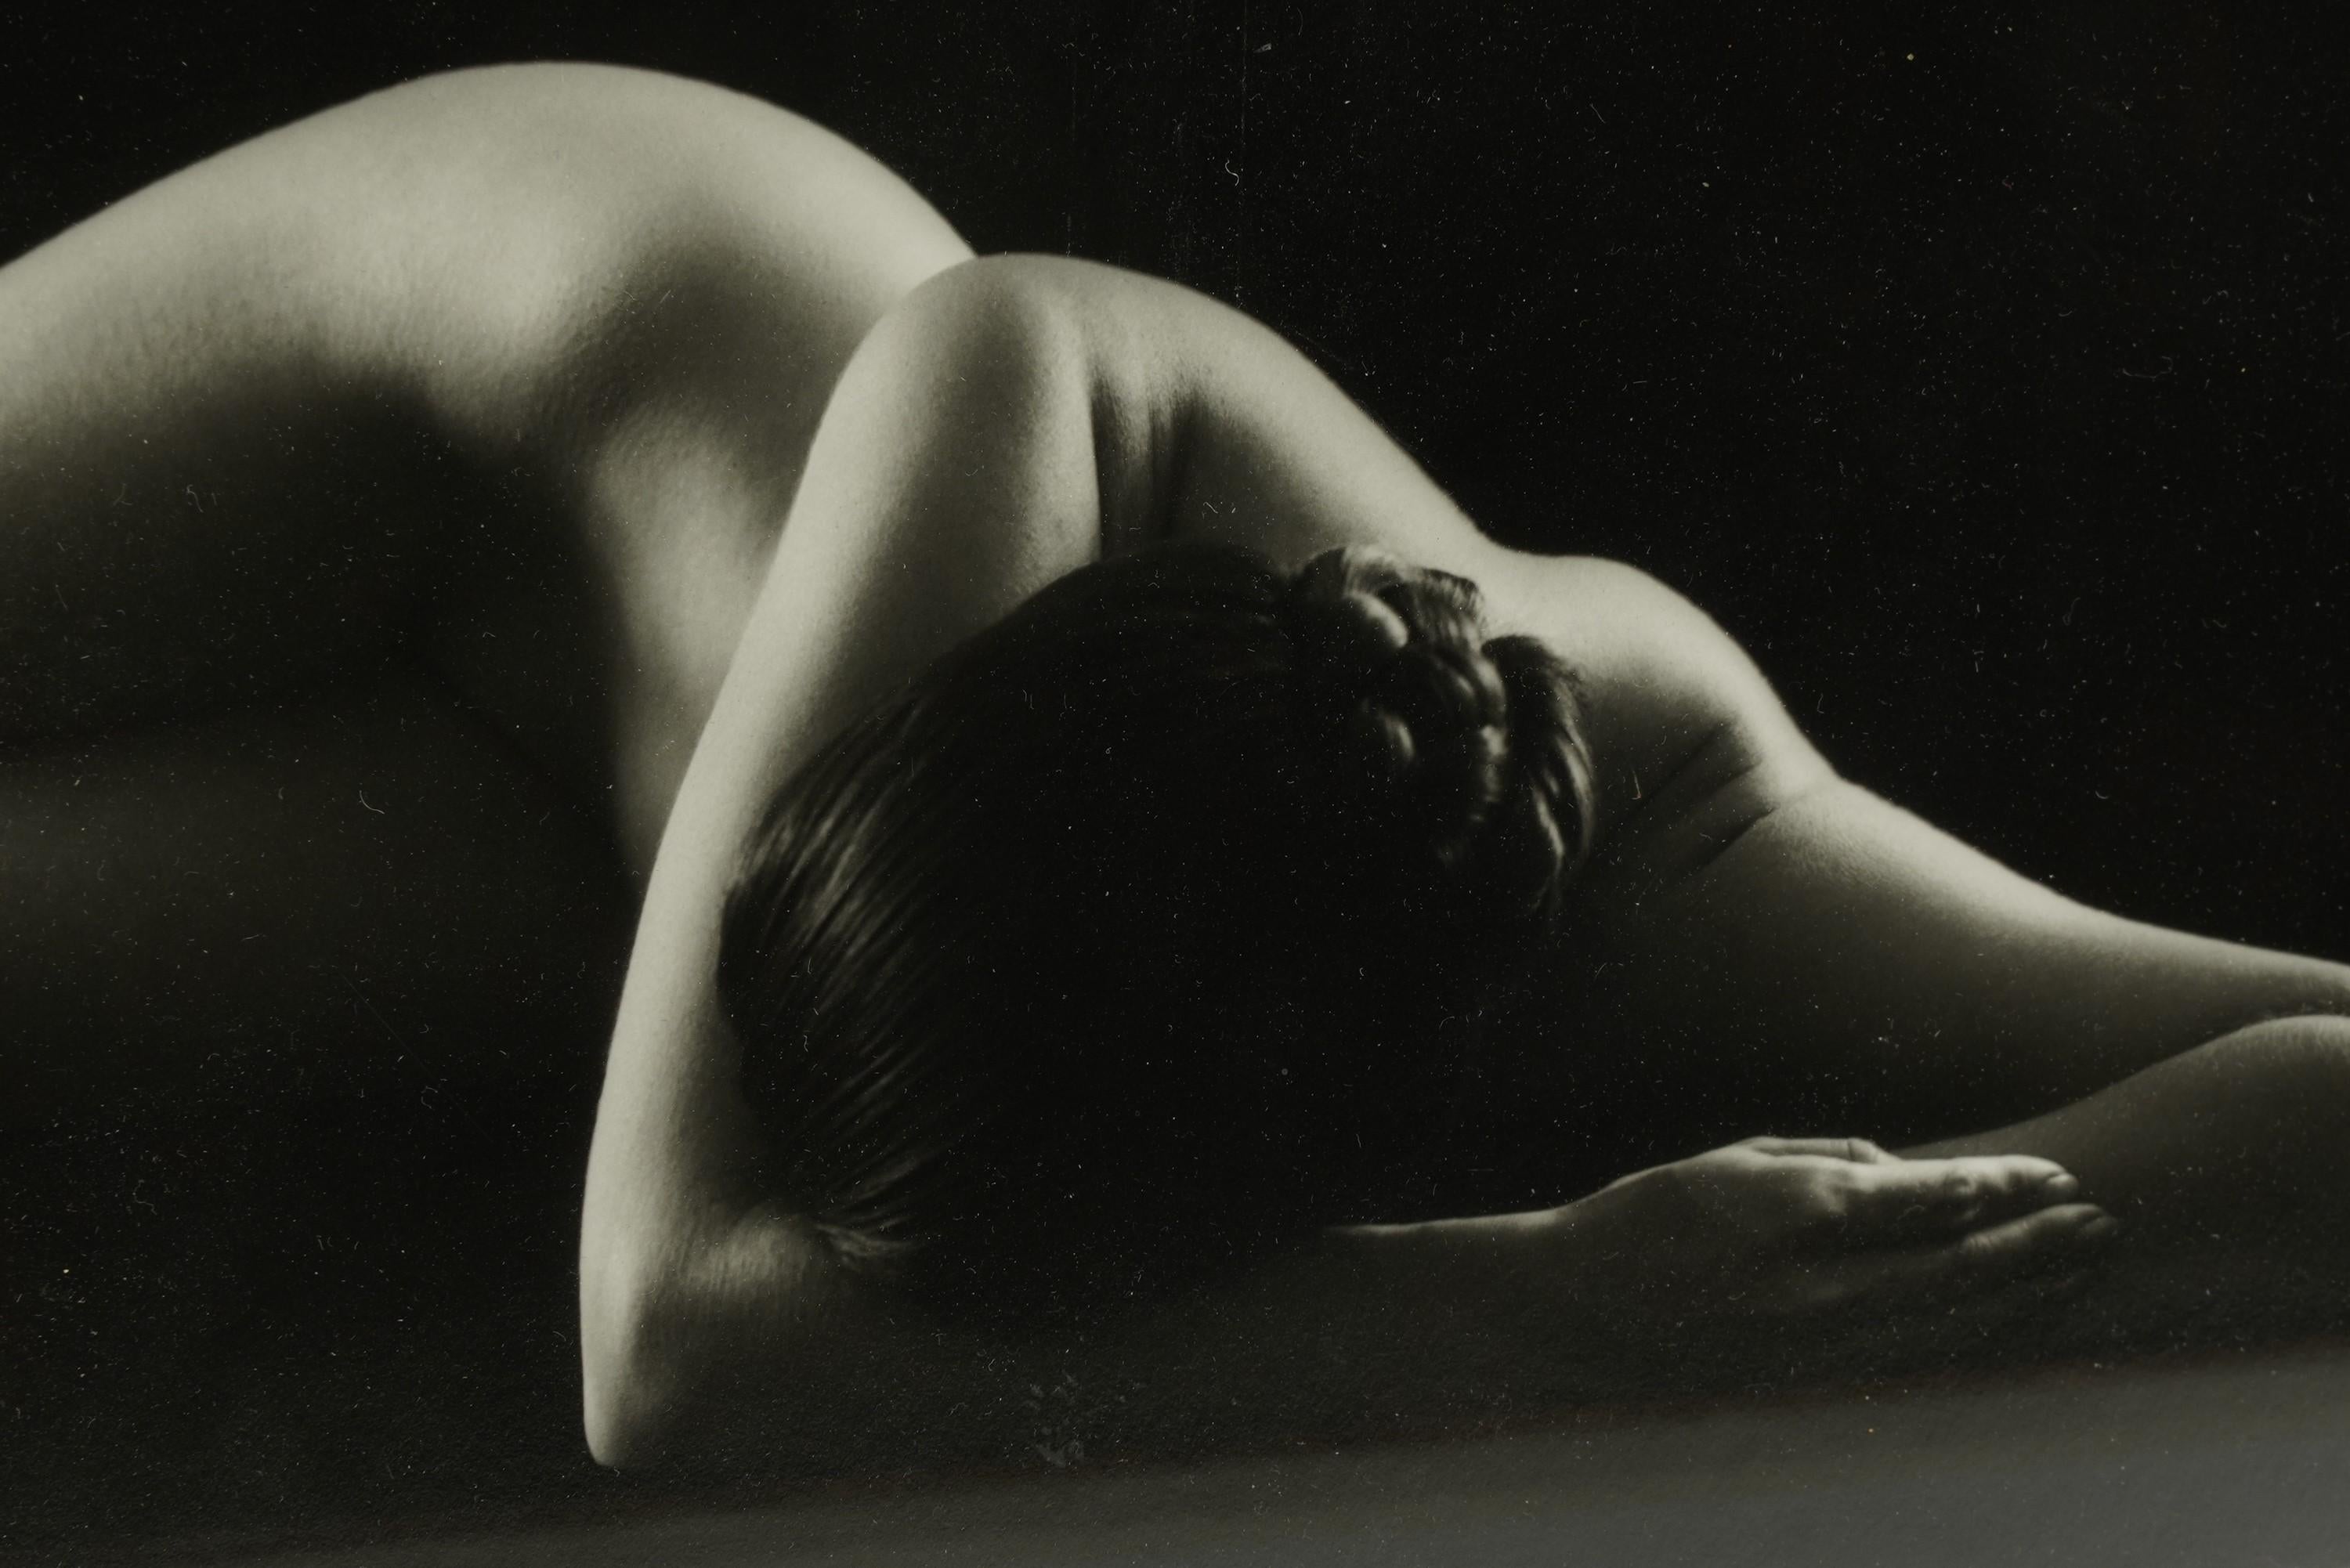 Ruth Bernhard Signed Gelatin Silver Photograph Print Perspective II, 1967 In Good Condition For Sale In Studio City, CA